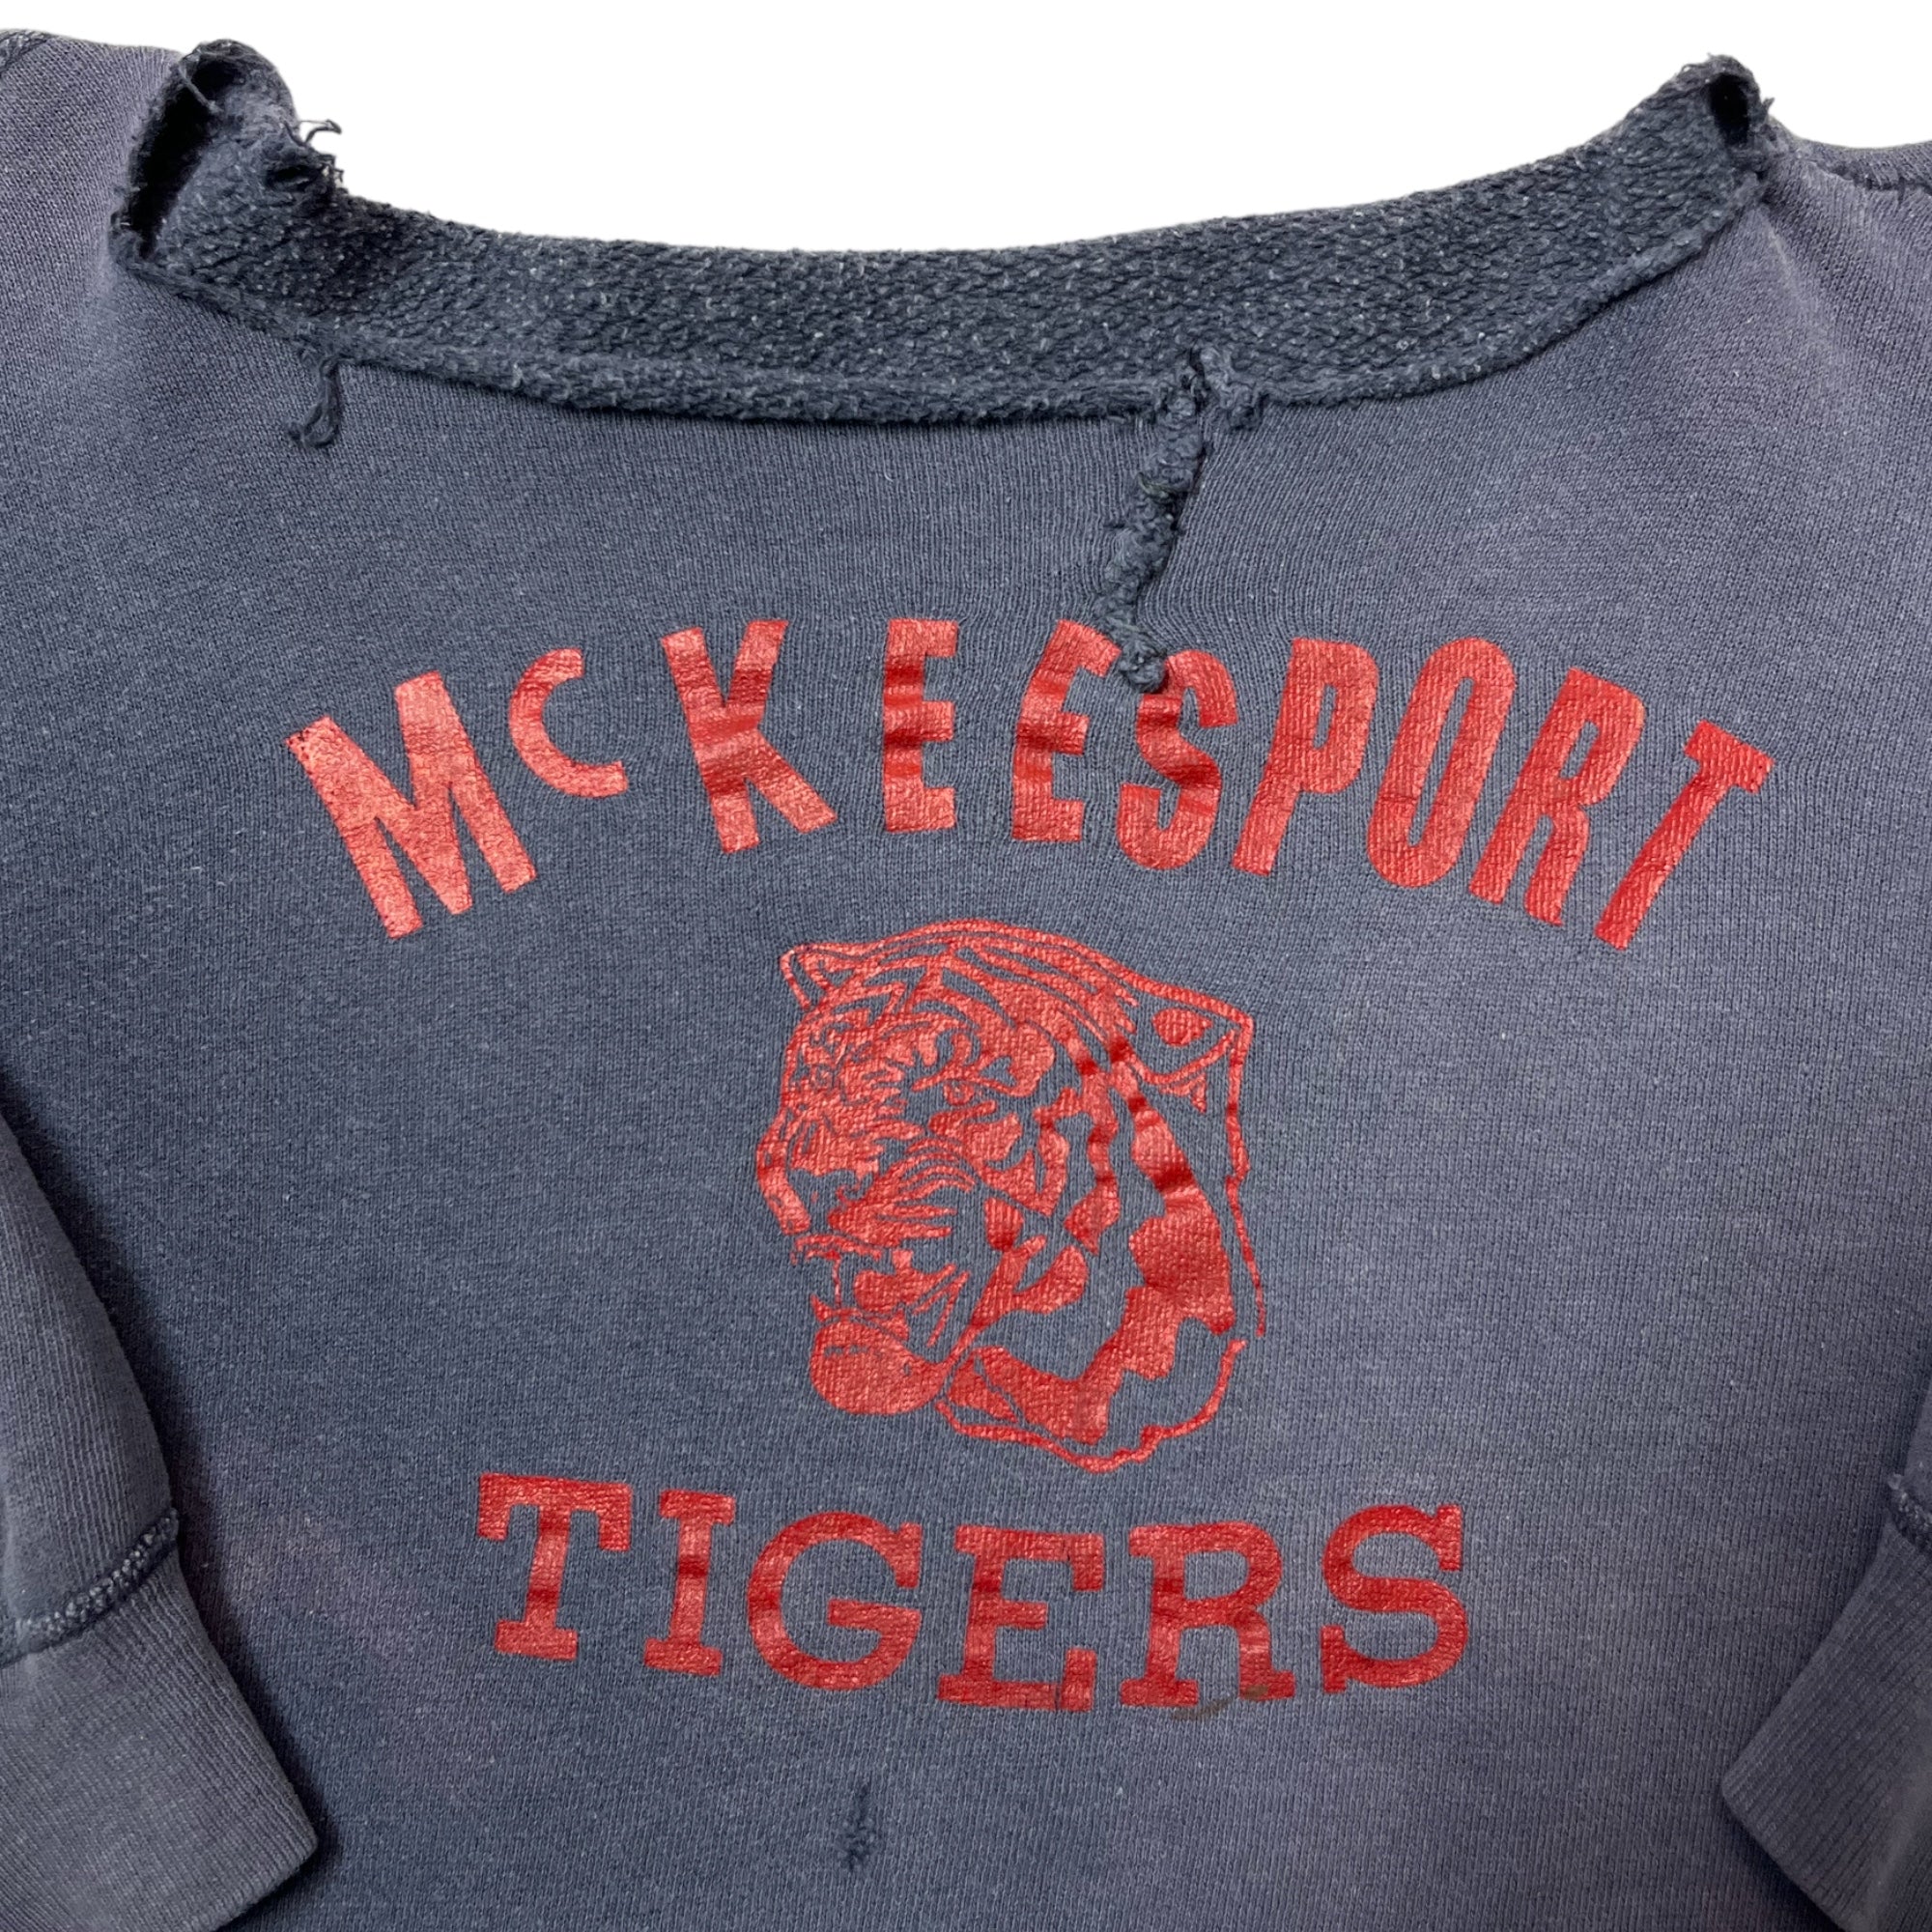 1950s ‘Property of’ McKeesport Tigers Hoodie- Turned-Crewneck - Faded Navy/Scarlet Red - S/M